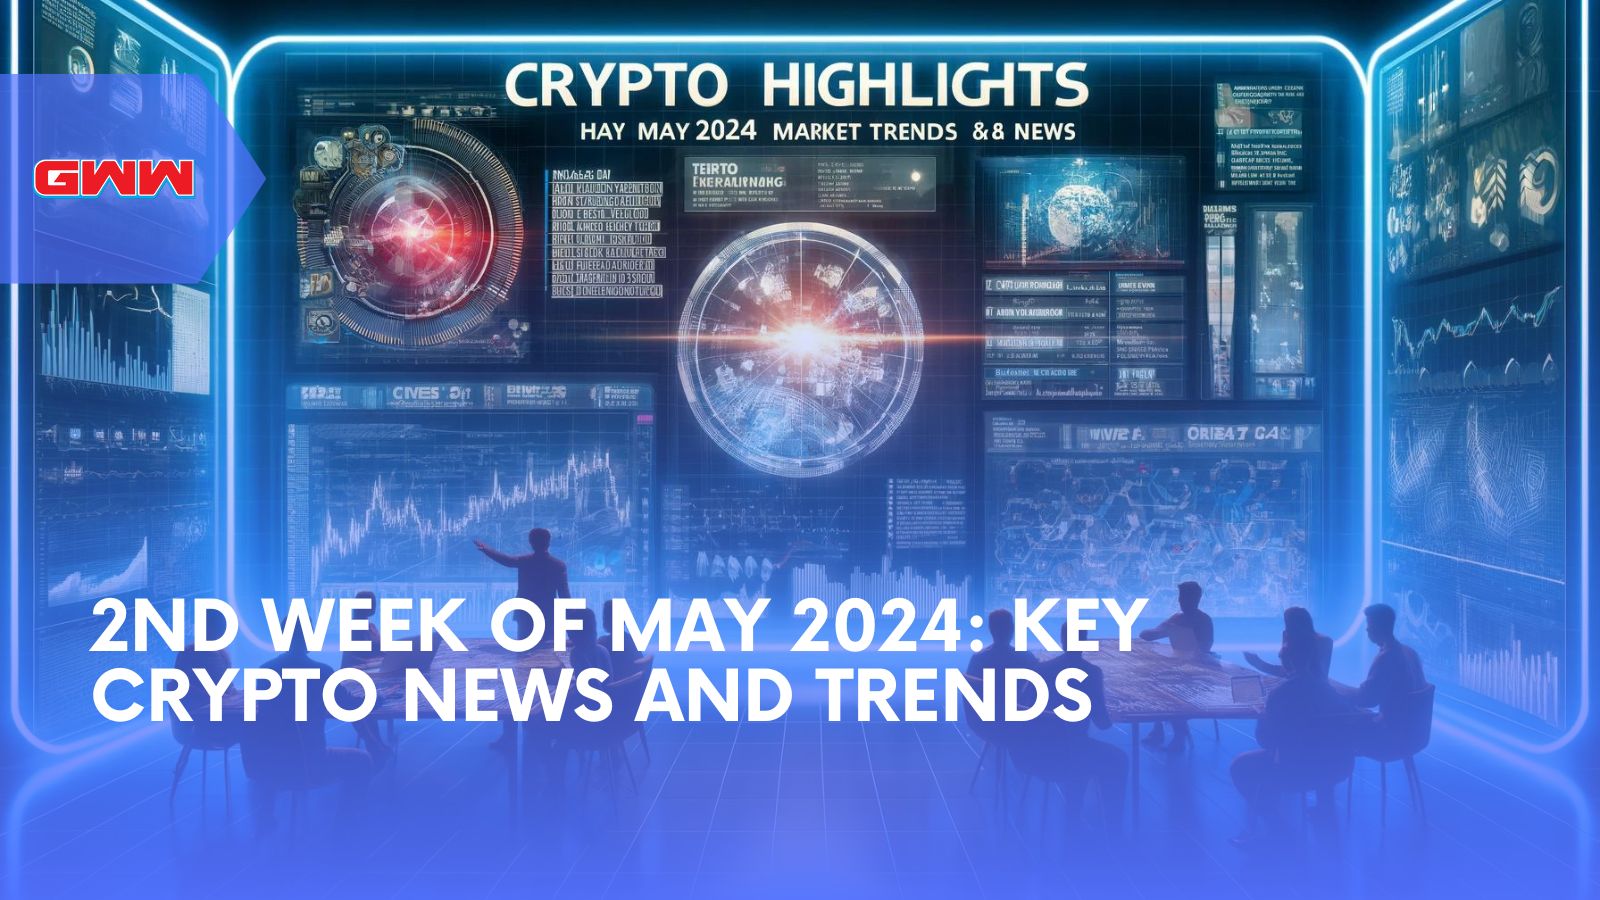 2nd week of May 2024: Key Crypto News and Trends